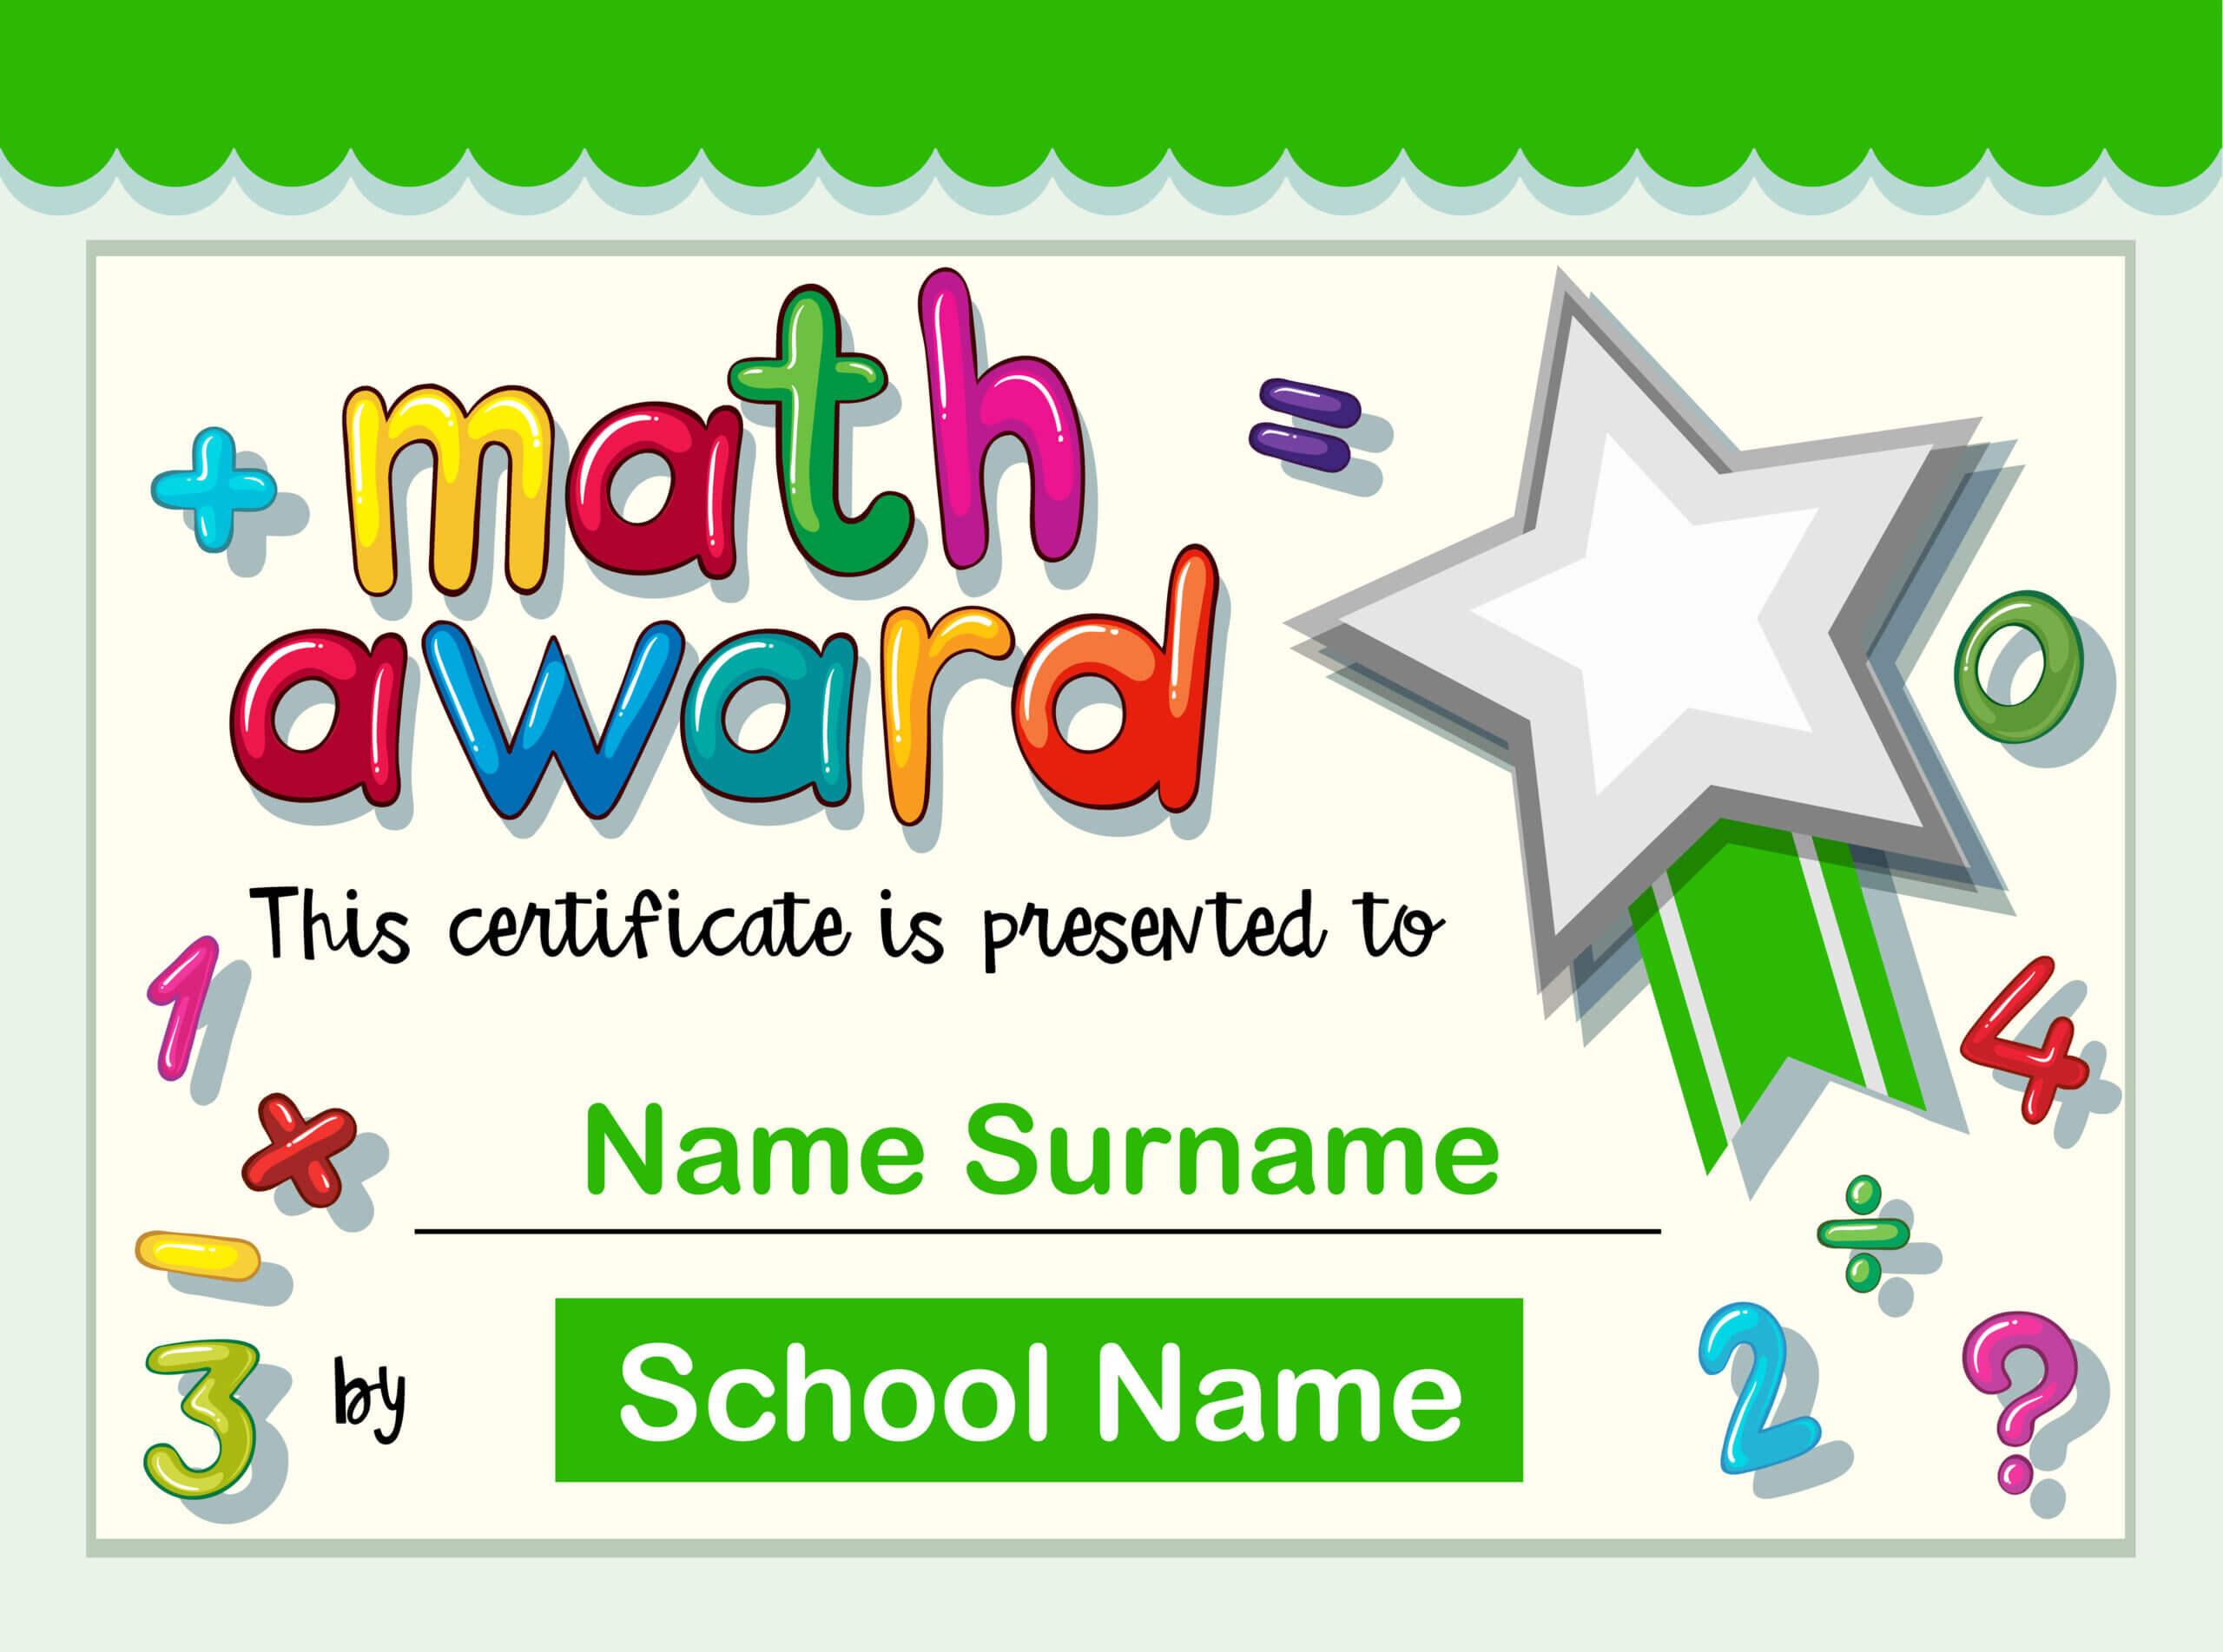 Certificate Template For Math Award - Download Free Vectors In Math Certificate Template